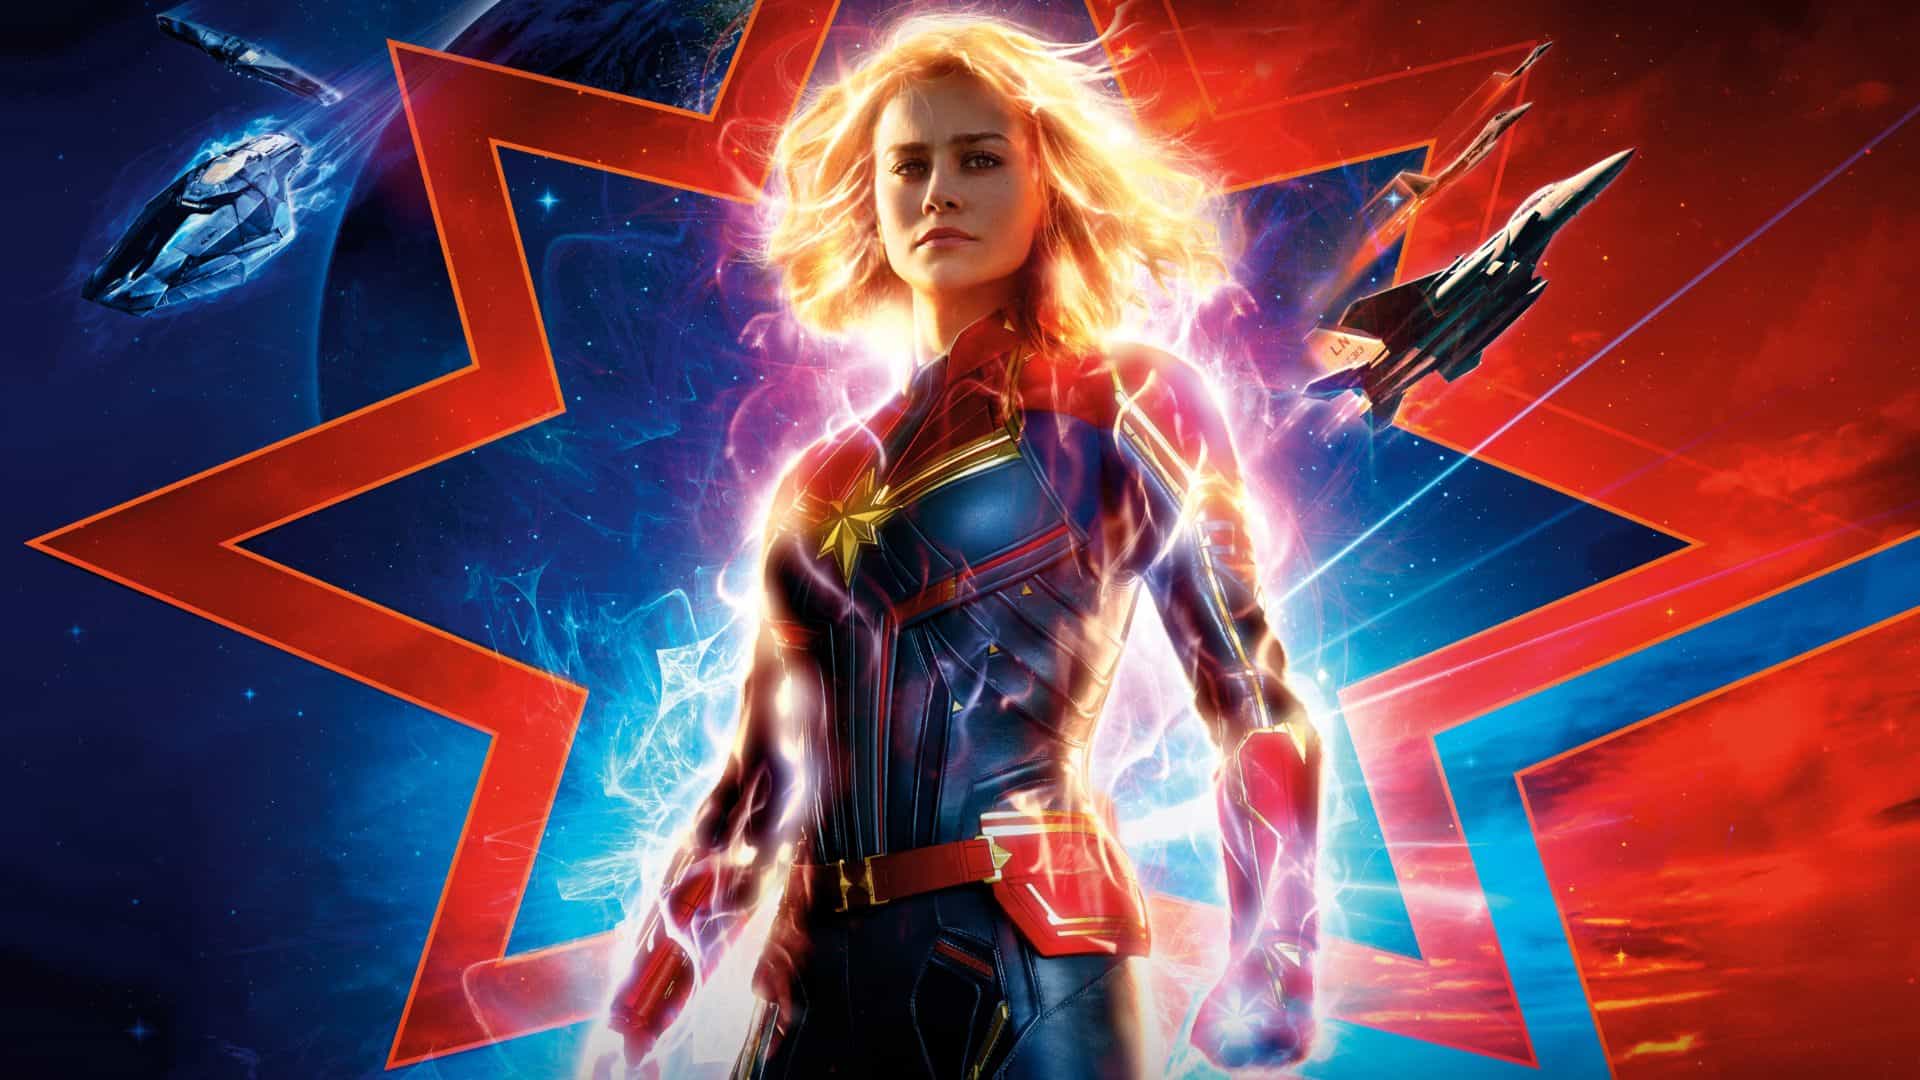 Captain marvel blu ray release date in india in hindi Captain Marvel 2019 720p 1080p 2160p 4k 10bit Bluray Hindi English X265 Hevc